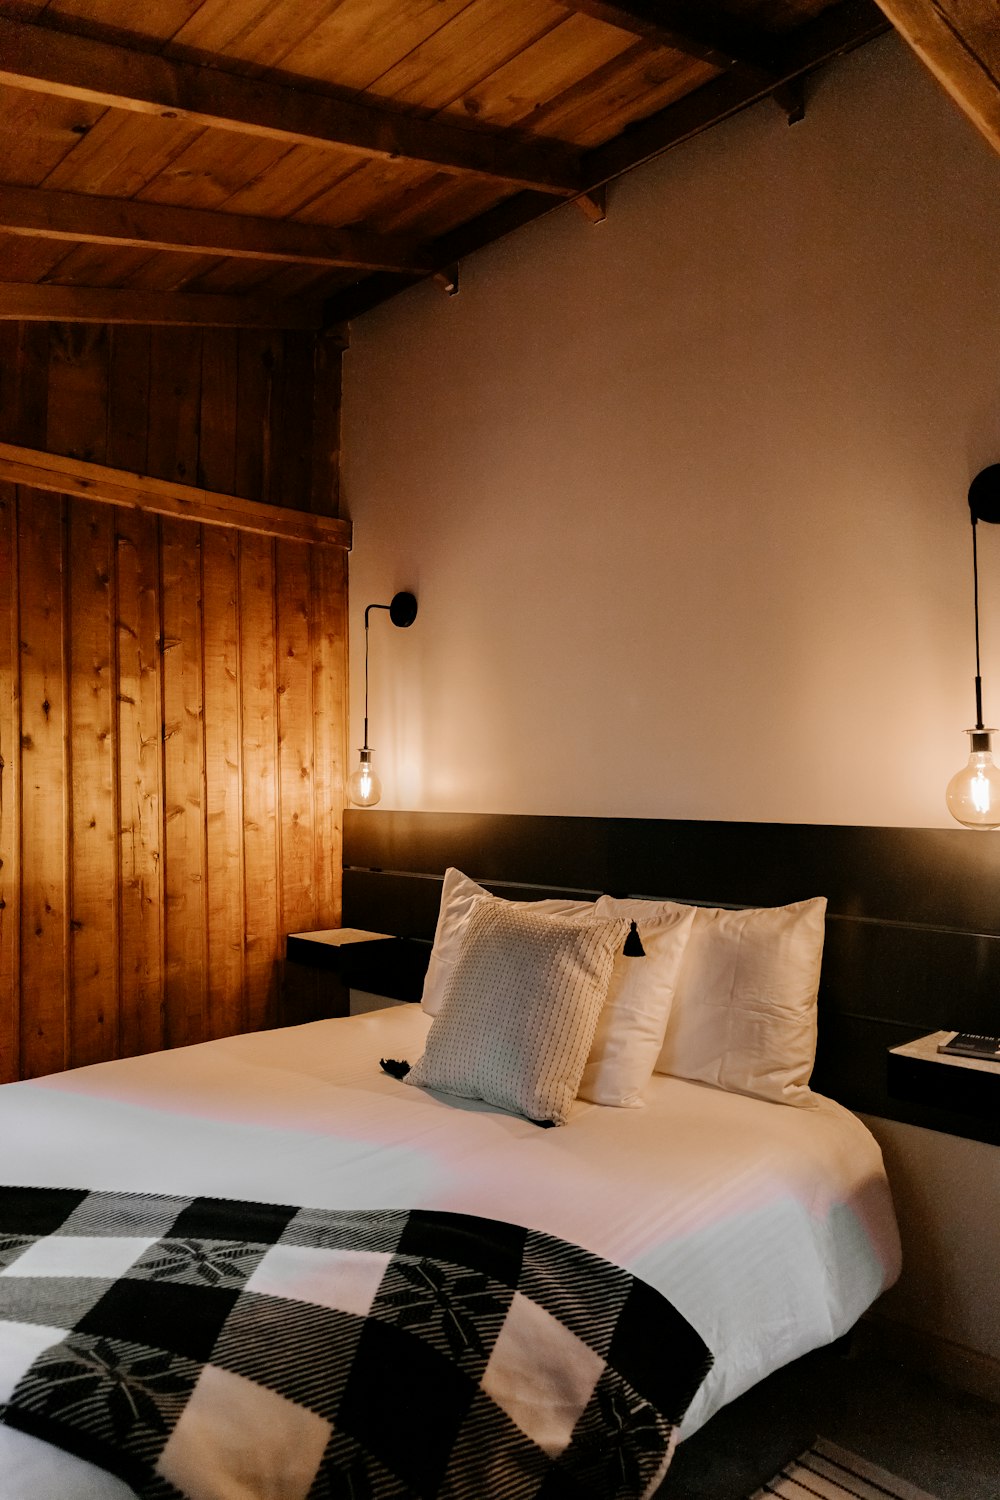 a bed sitting in a bedroom next to a wooden wall